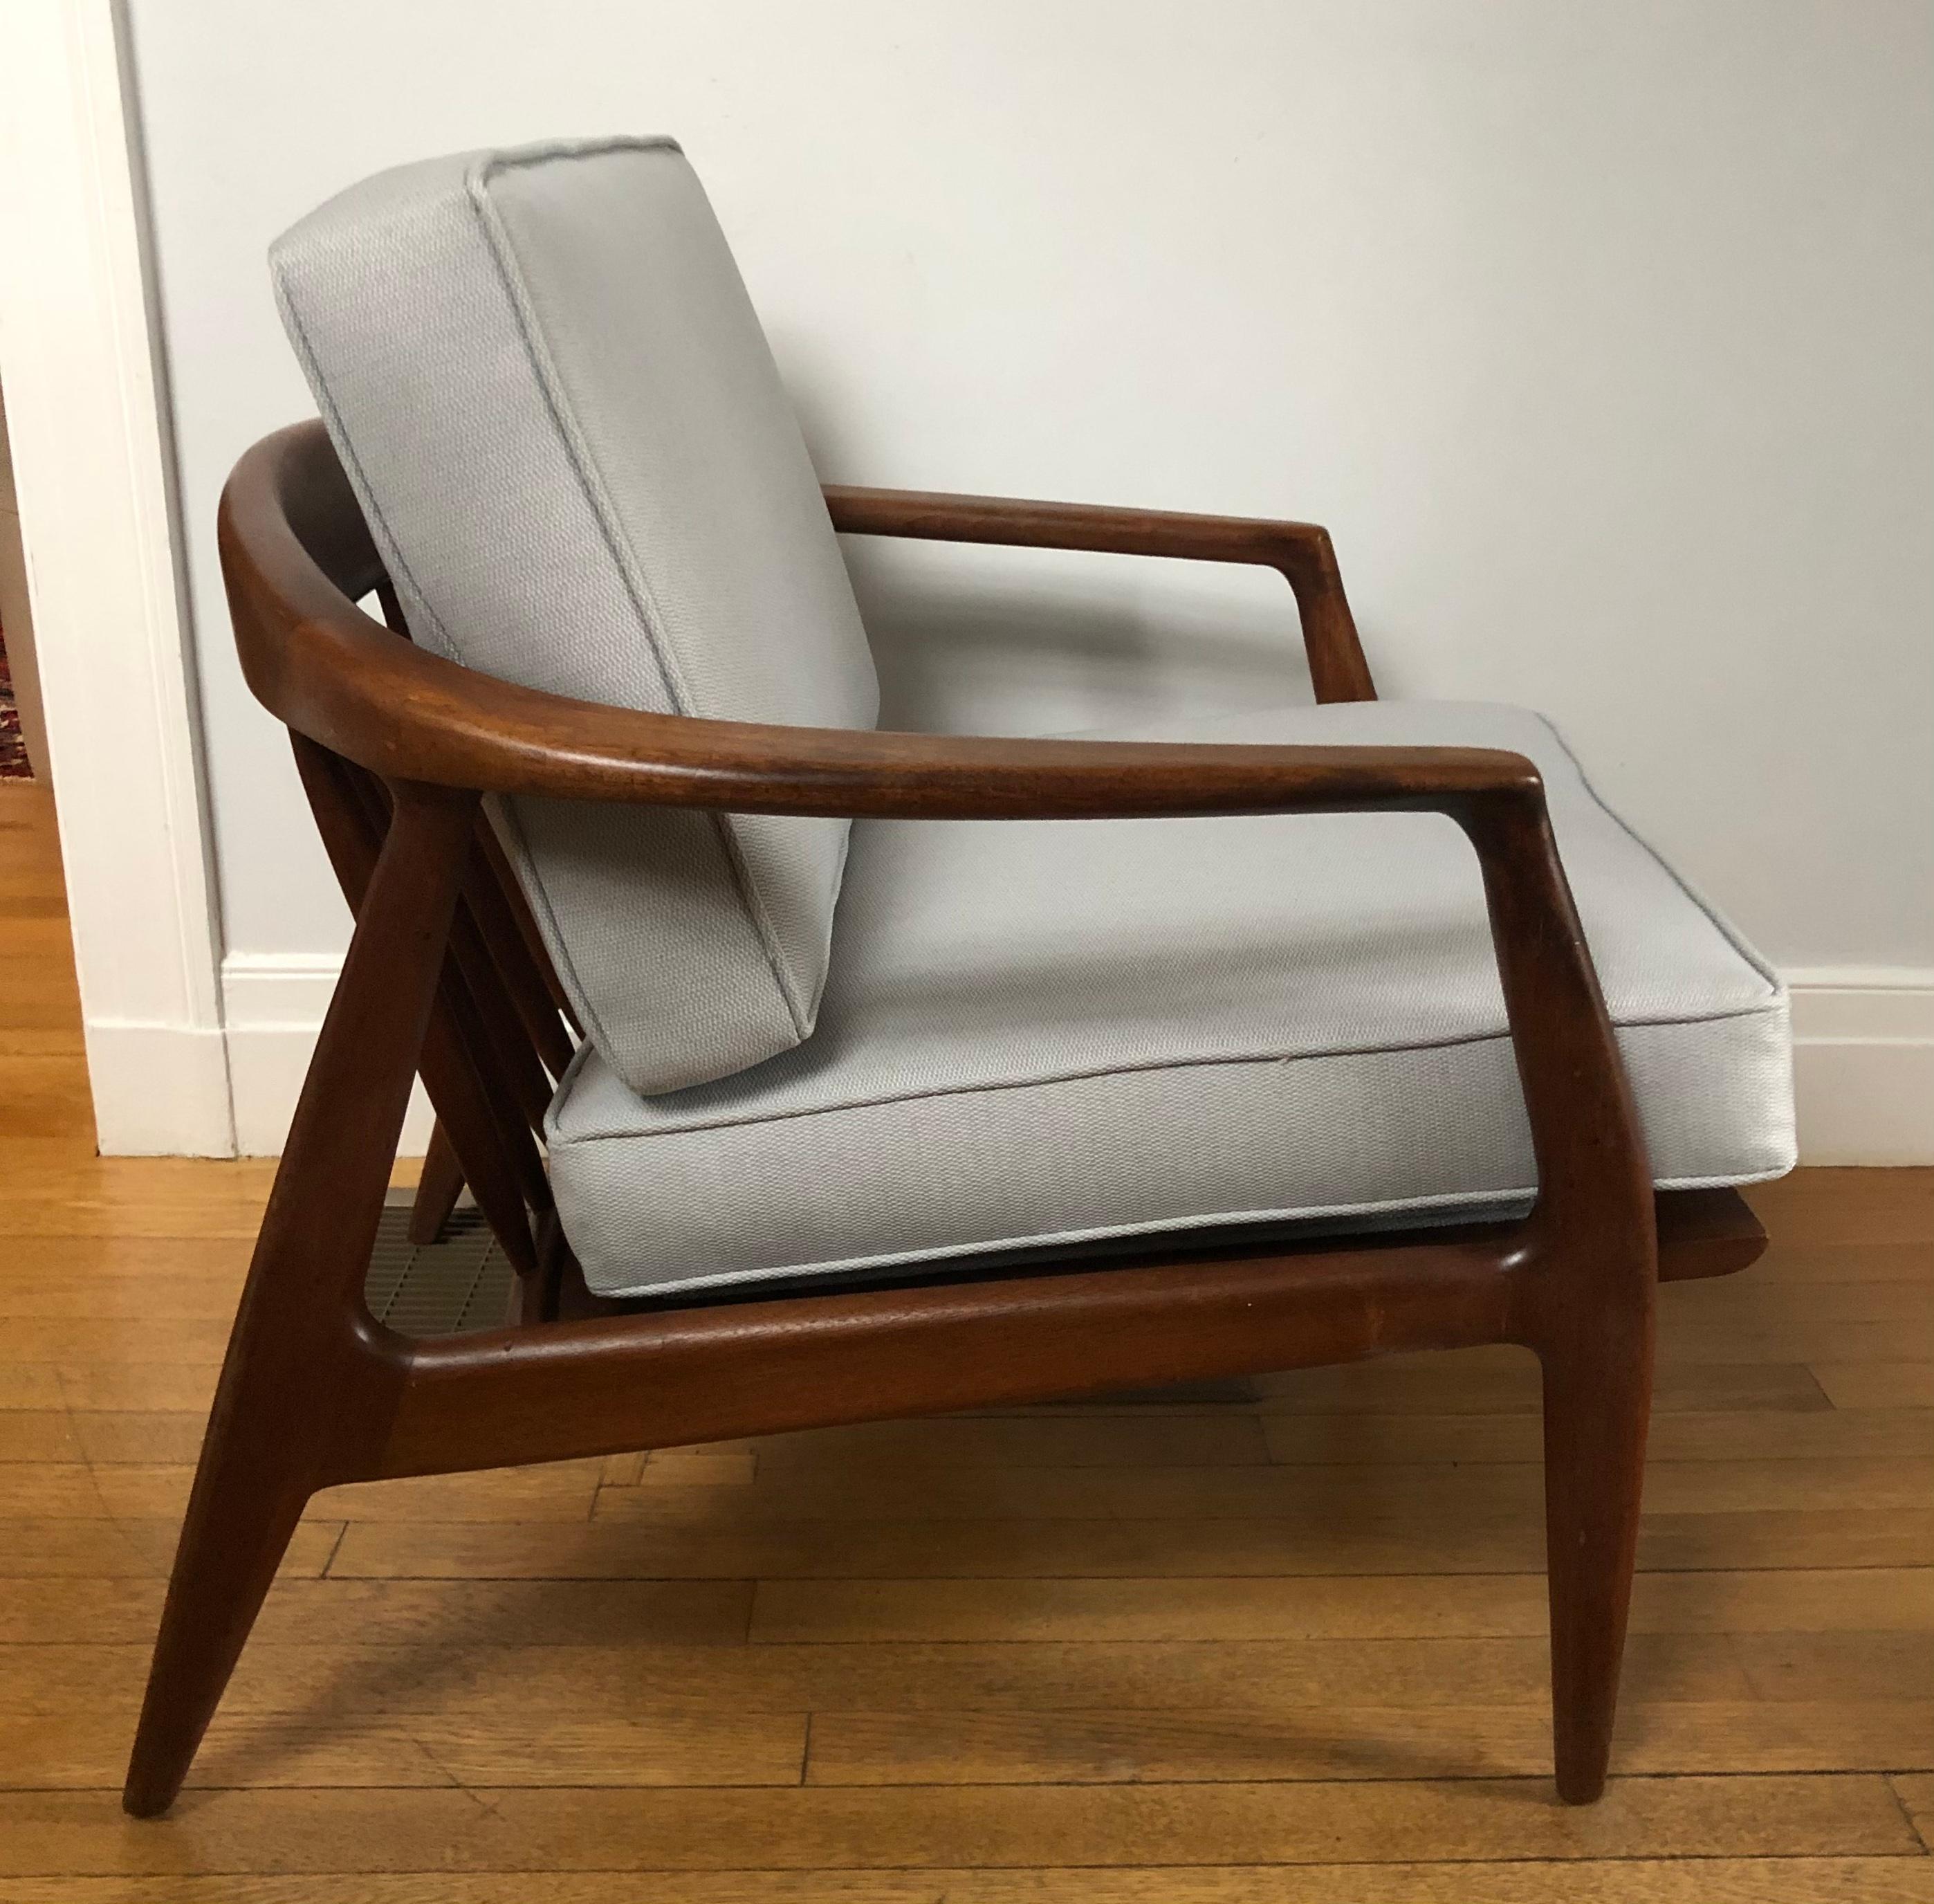 Midcentury teak lounge chair with curved back. This iconic chair was designed by Folke Ohlsson for DUX (Model 72-C). It was made in Sweden and dates back to the 1950s-1960s.
The wood frame of this lounge chair is in very good condition with a nice